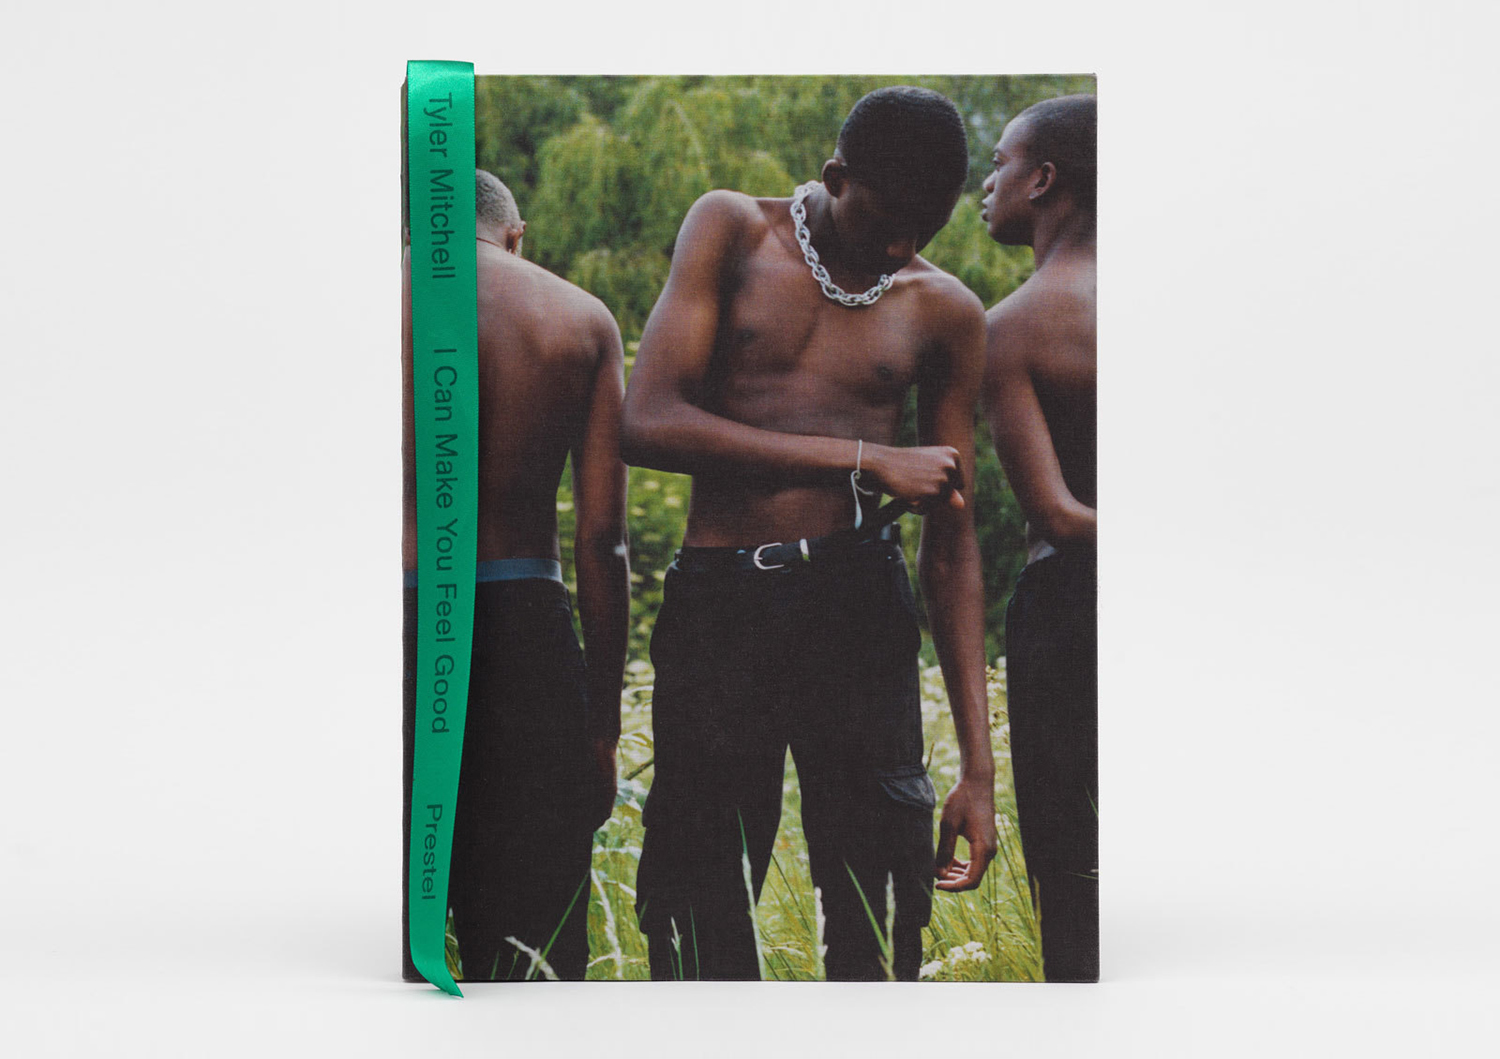 I Can Make You Feel Good. A book by photographer Tyler Mitchell with design by Studio Lin and an opinion from Richard Baird